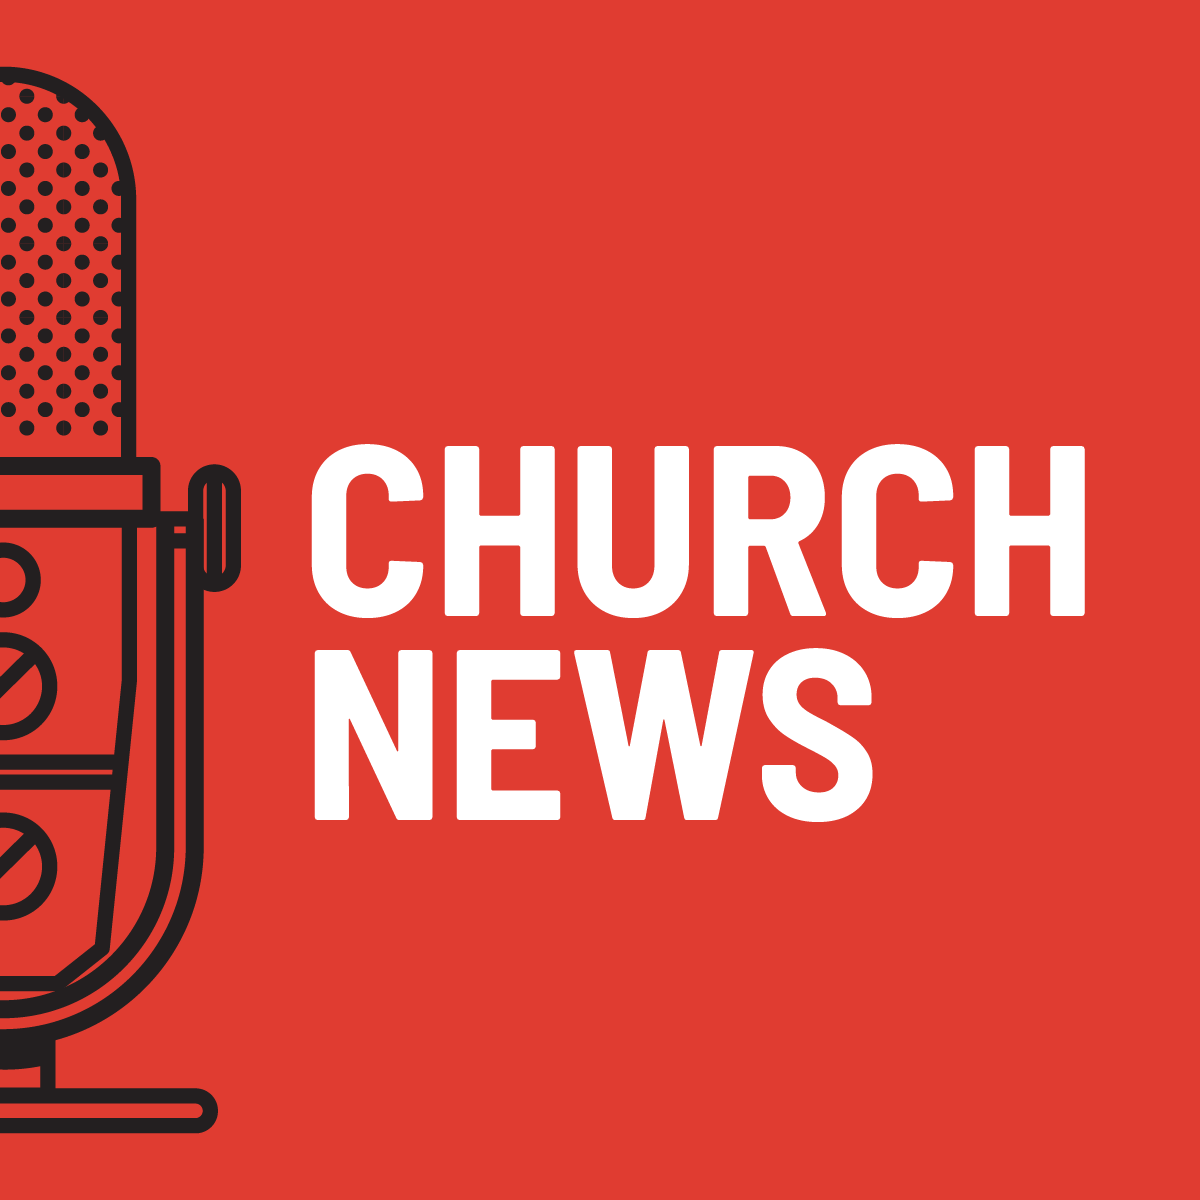 Celebrating 90 years of Church News: Former editor Gerry Avant talks about her nearly five decades of Church News reporting